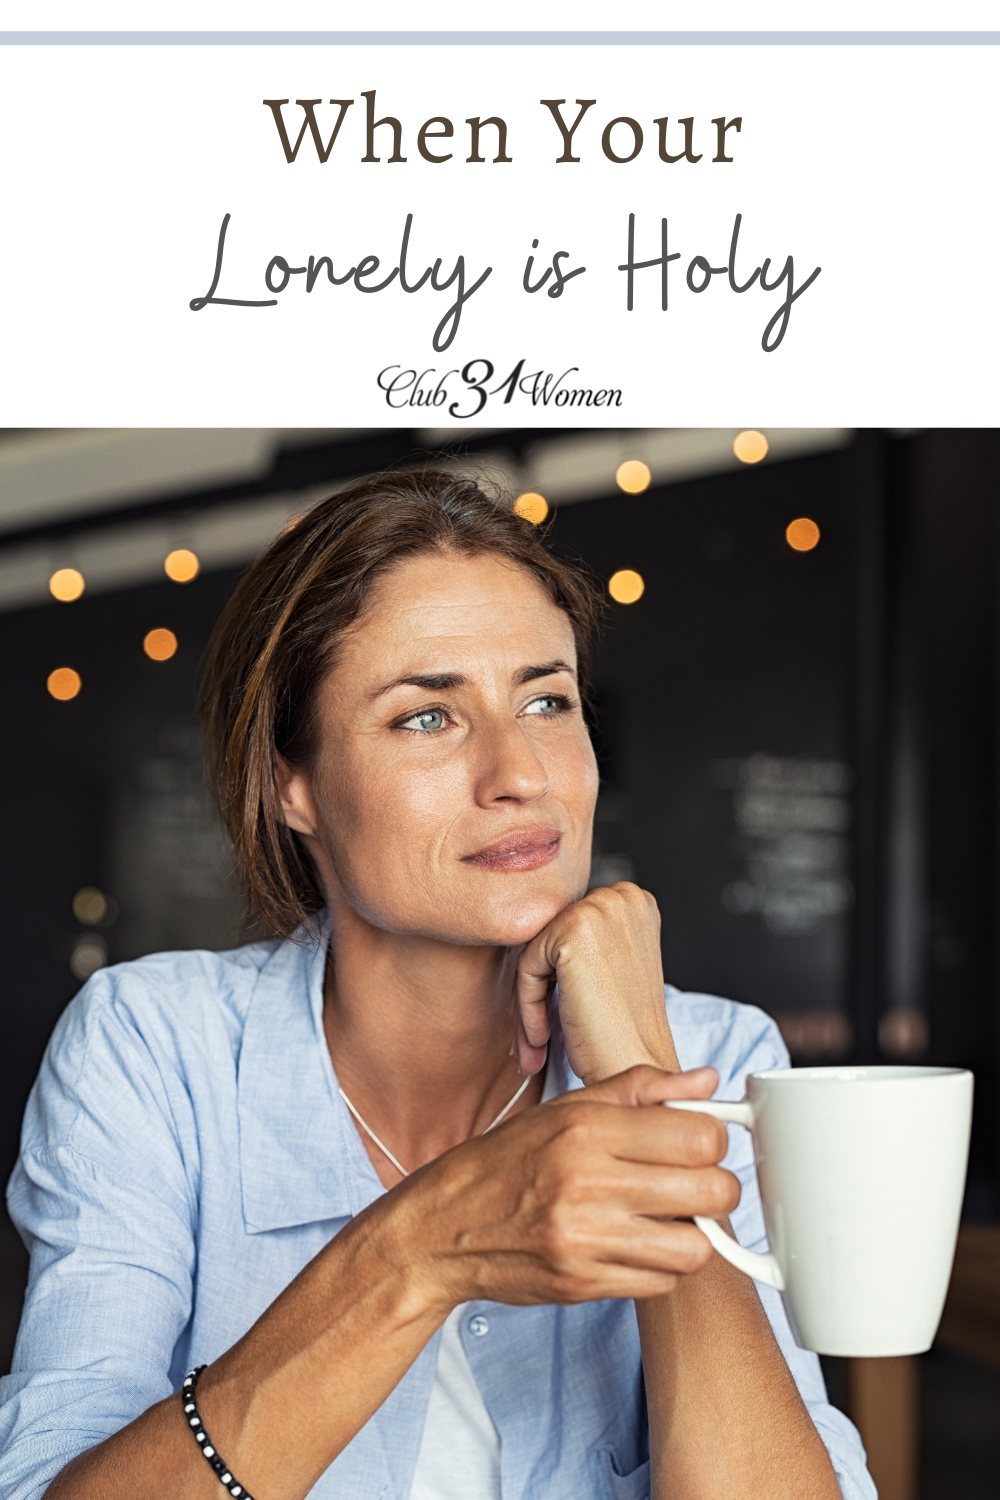 Being surrounded by people, even good people who love us, can still leave us feeling lonely at times. What if God makes your lonely holy? via @Club31Women